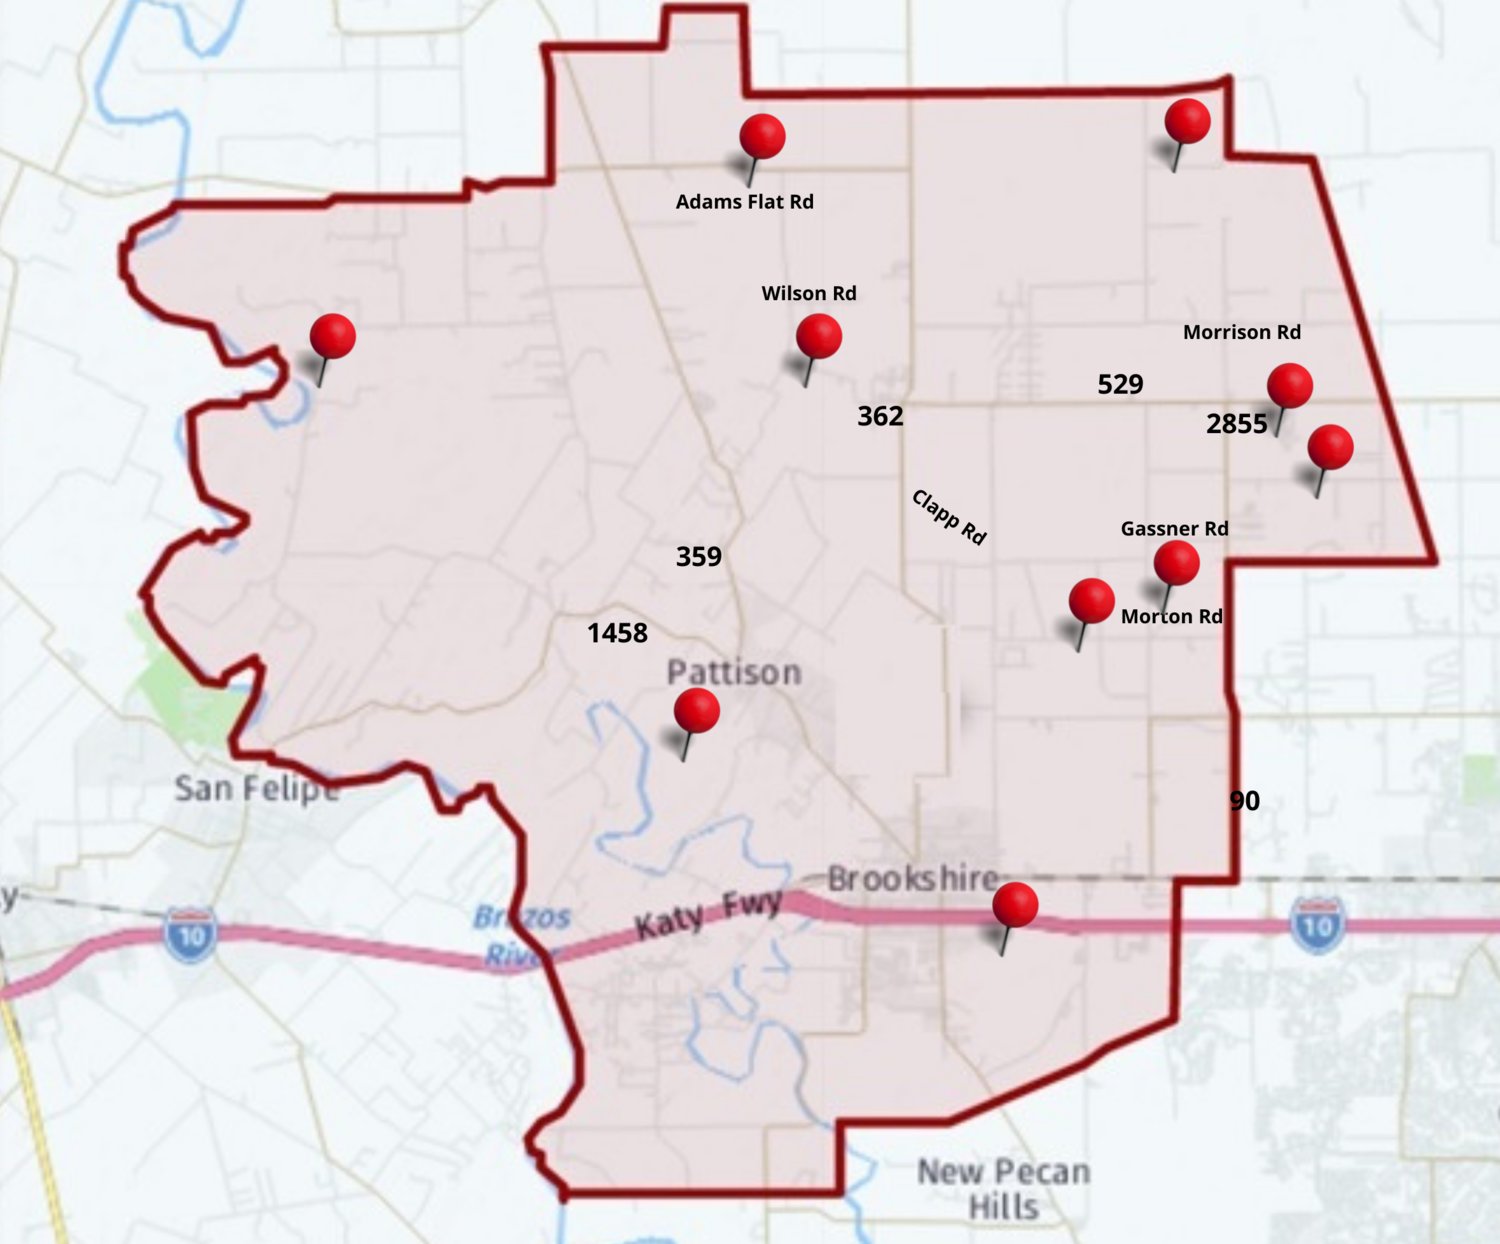 Royal ISD has at least 10 new subdivisions coming to it over the next few years. The developments are expected to bring thousands of students to the district.